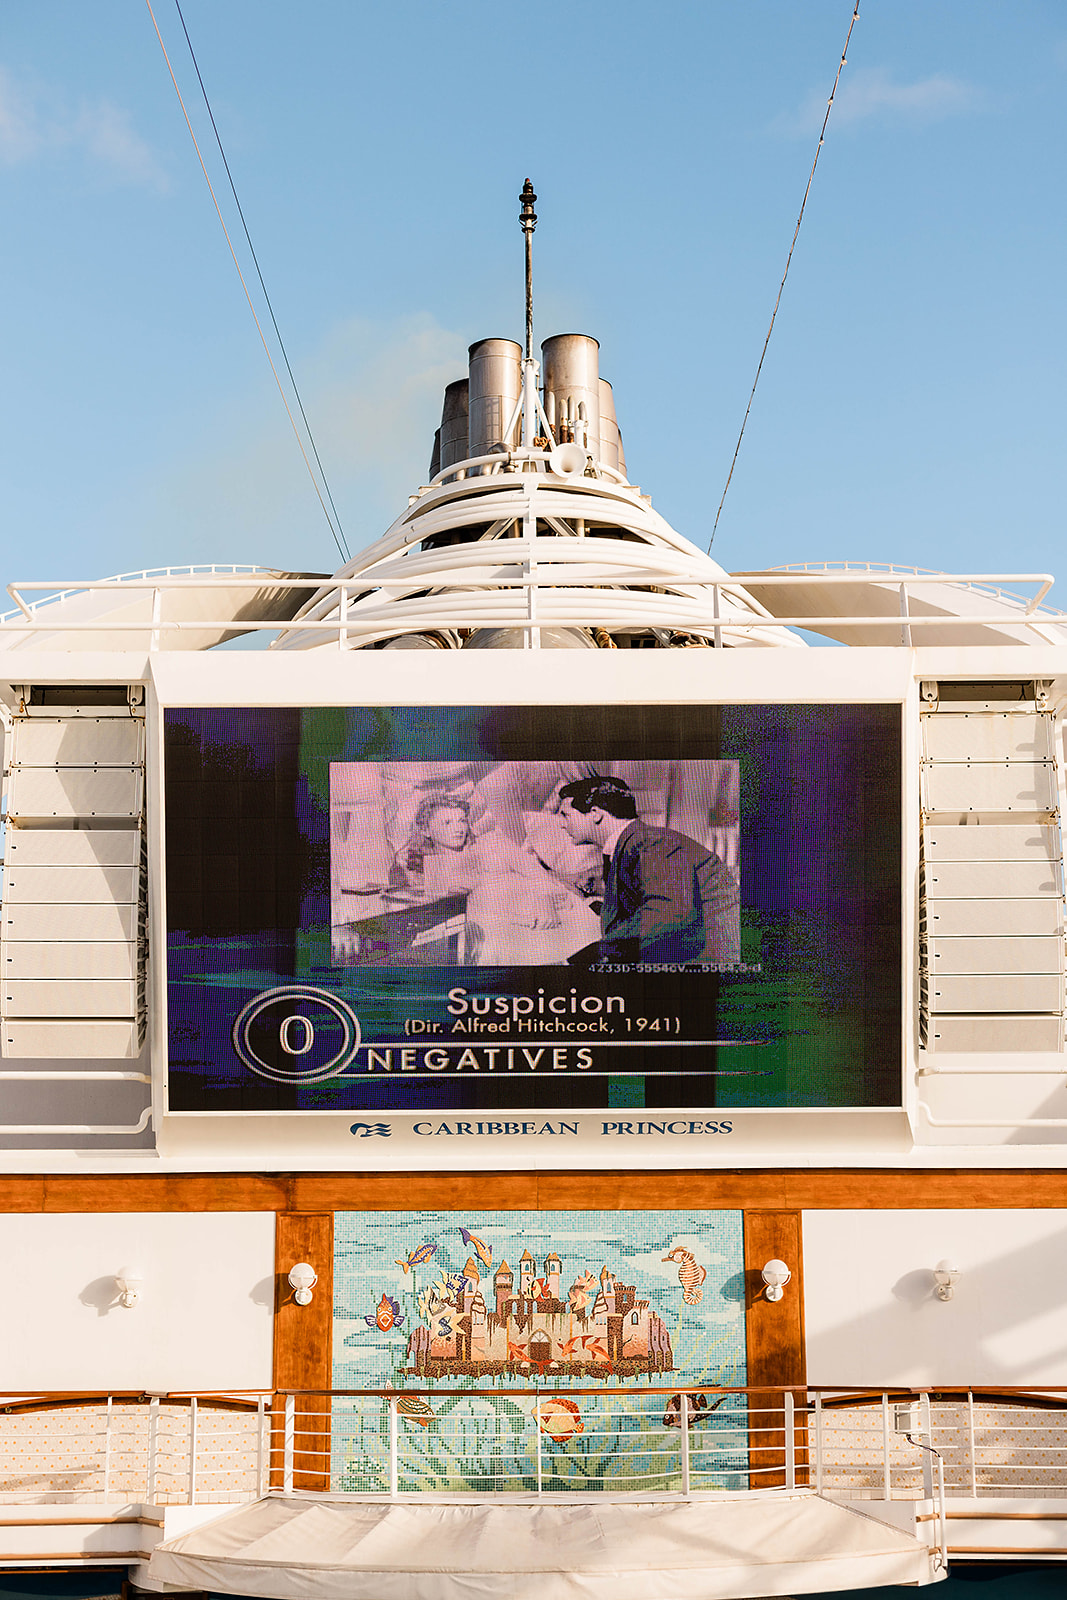 Princess Cruises, Musings of a Curvy Lady, Cruise Vacation, Family Cruise Vacation, Caribbean Cruise Vacation, Plus Size Travel, Caribbean Vacation, MedallionClass Ship, Opera, Cruise Entertainment, Princess Theatre, Movie Under the Stars